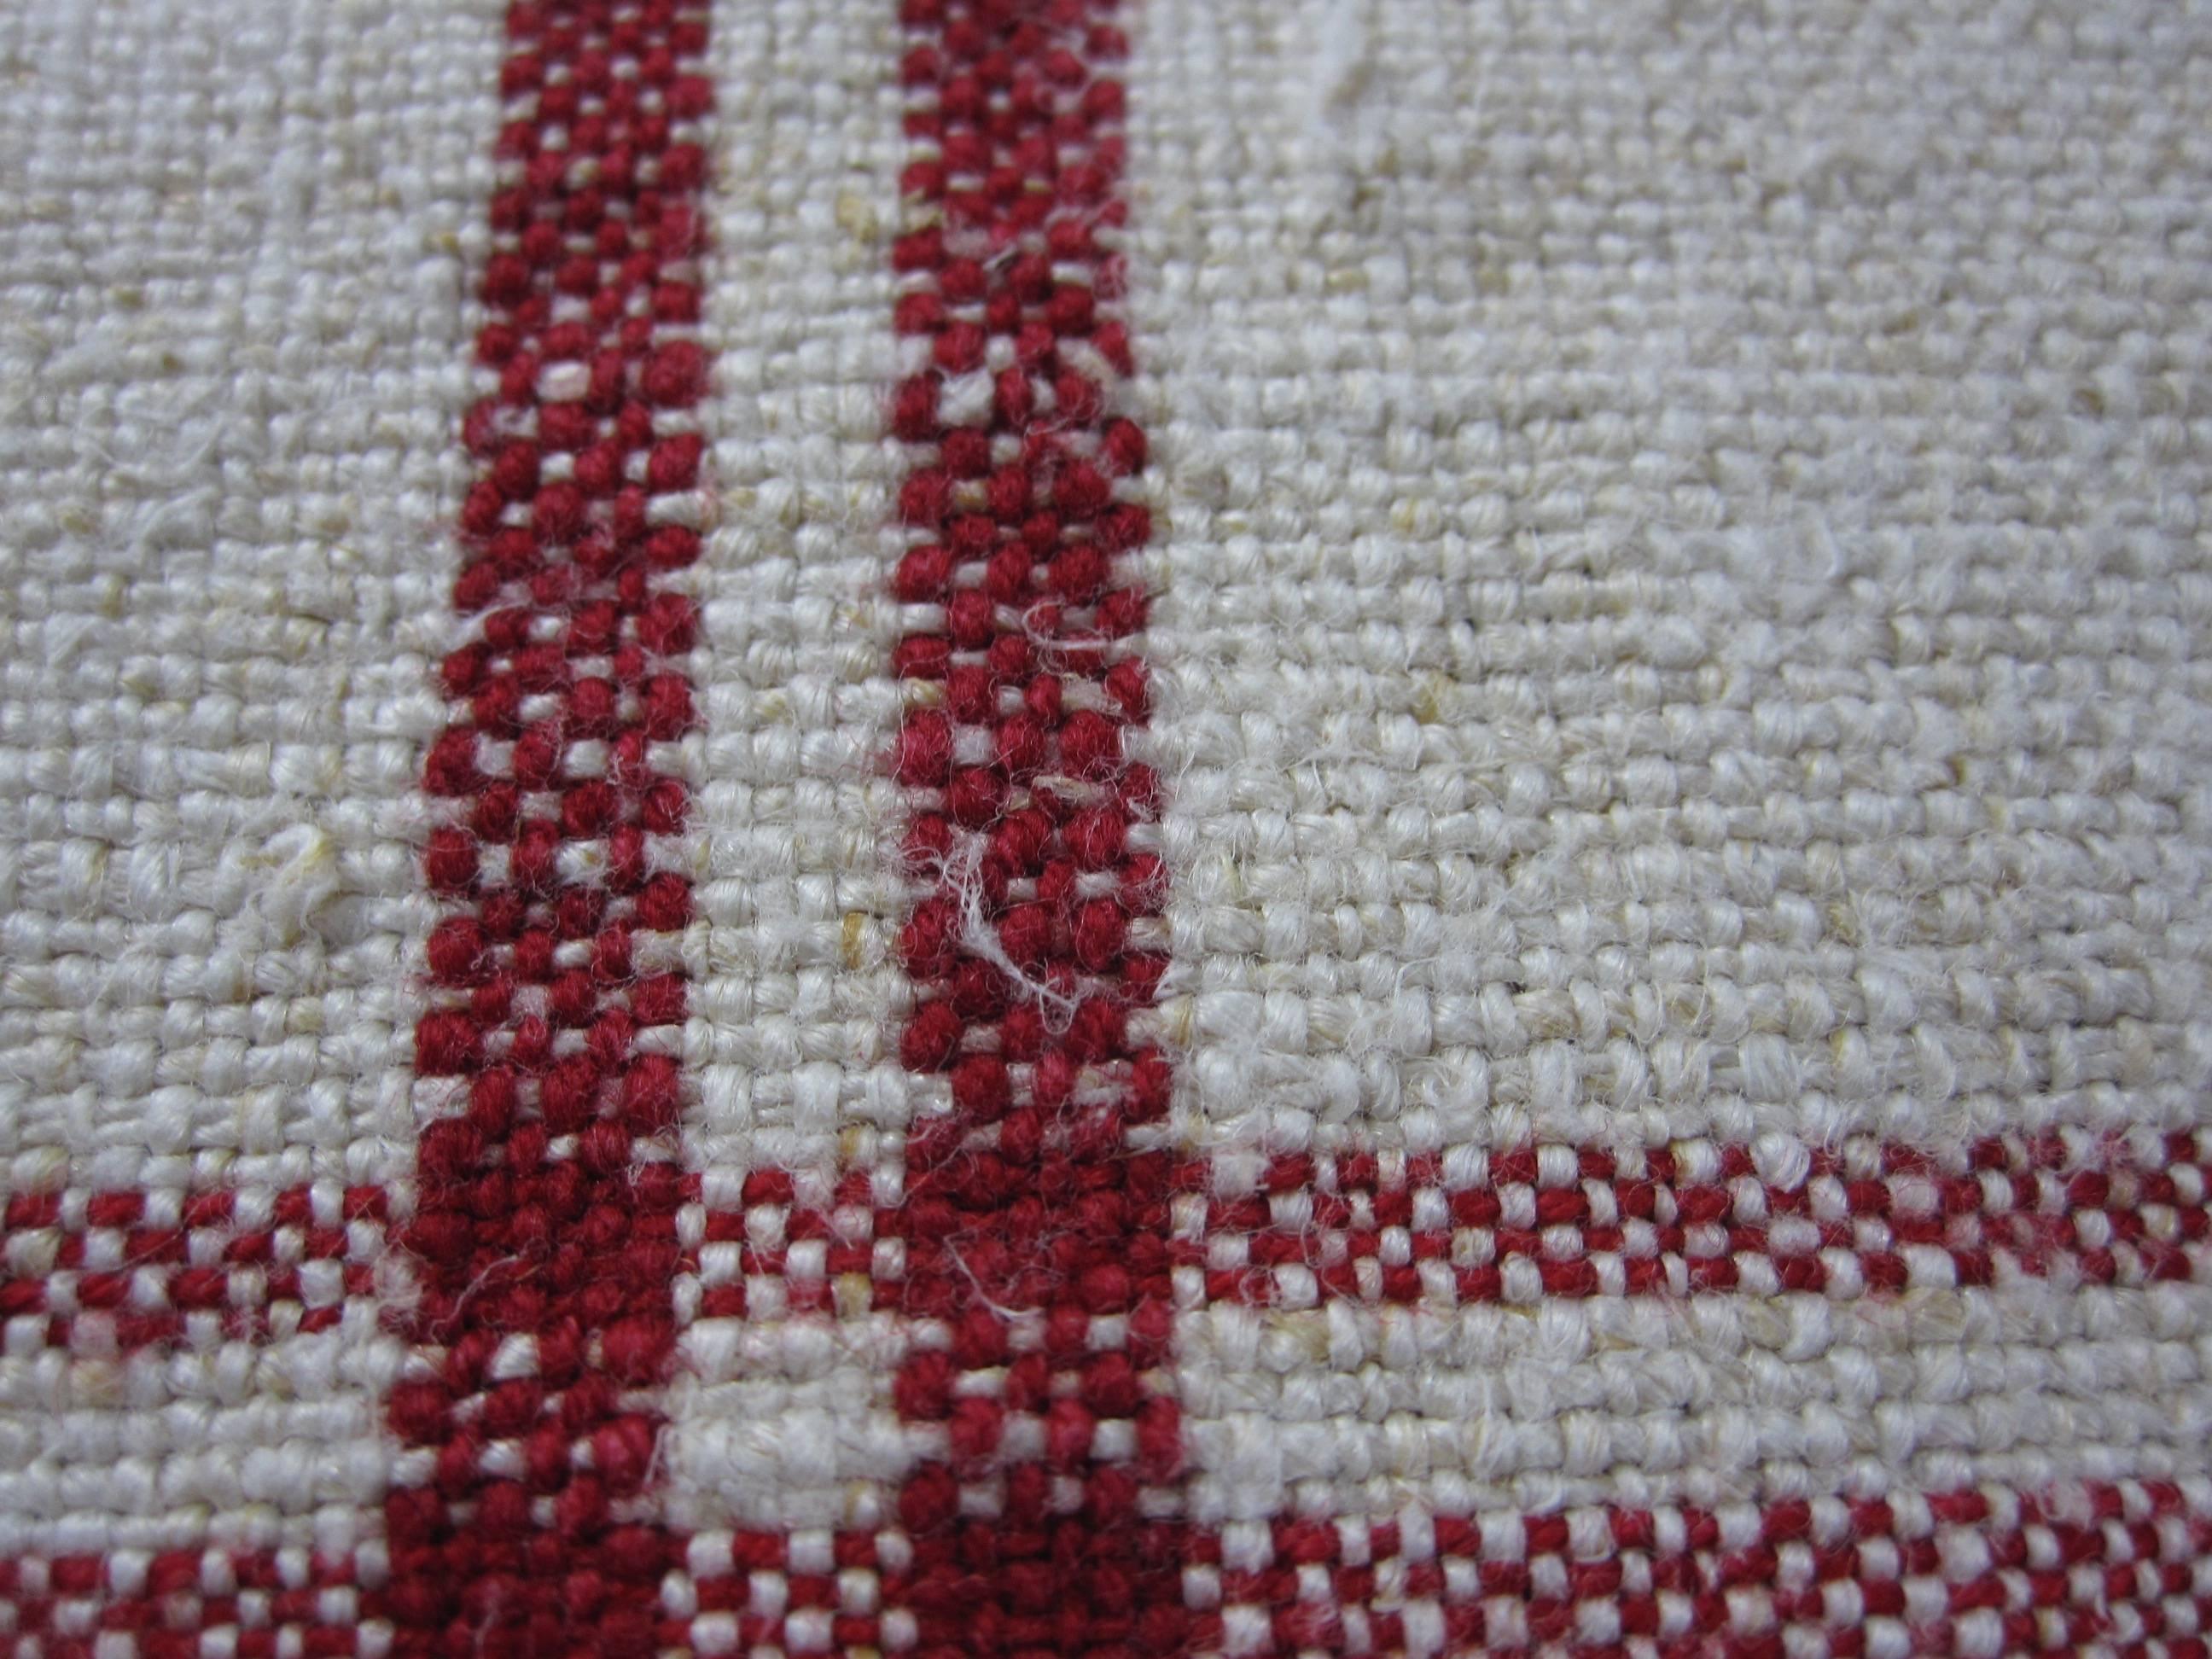 Embroidered French Provençal Rustic Hand-Woven & Initialed Linen Red Kitchen Torchons Towels